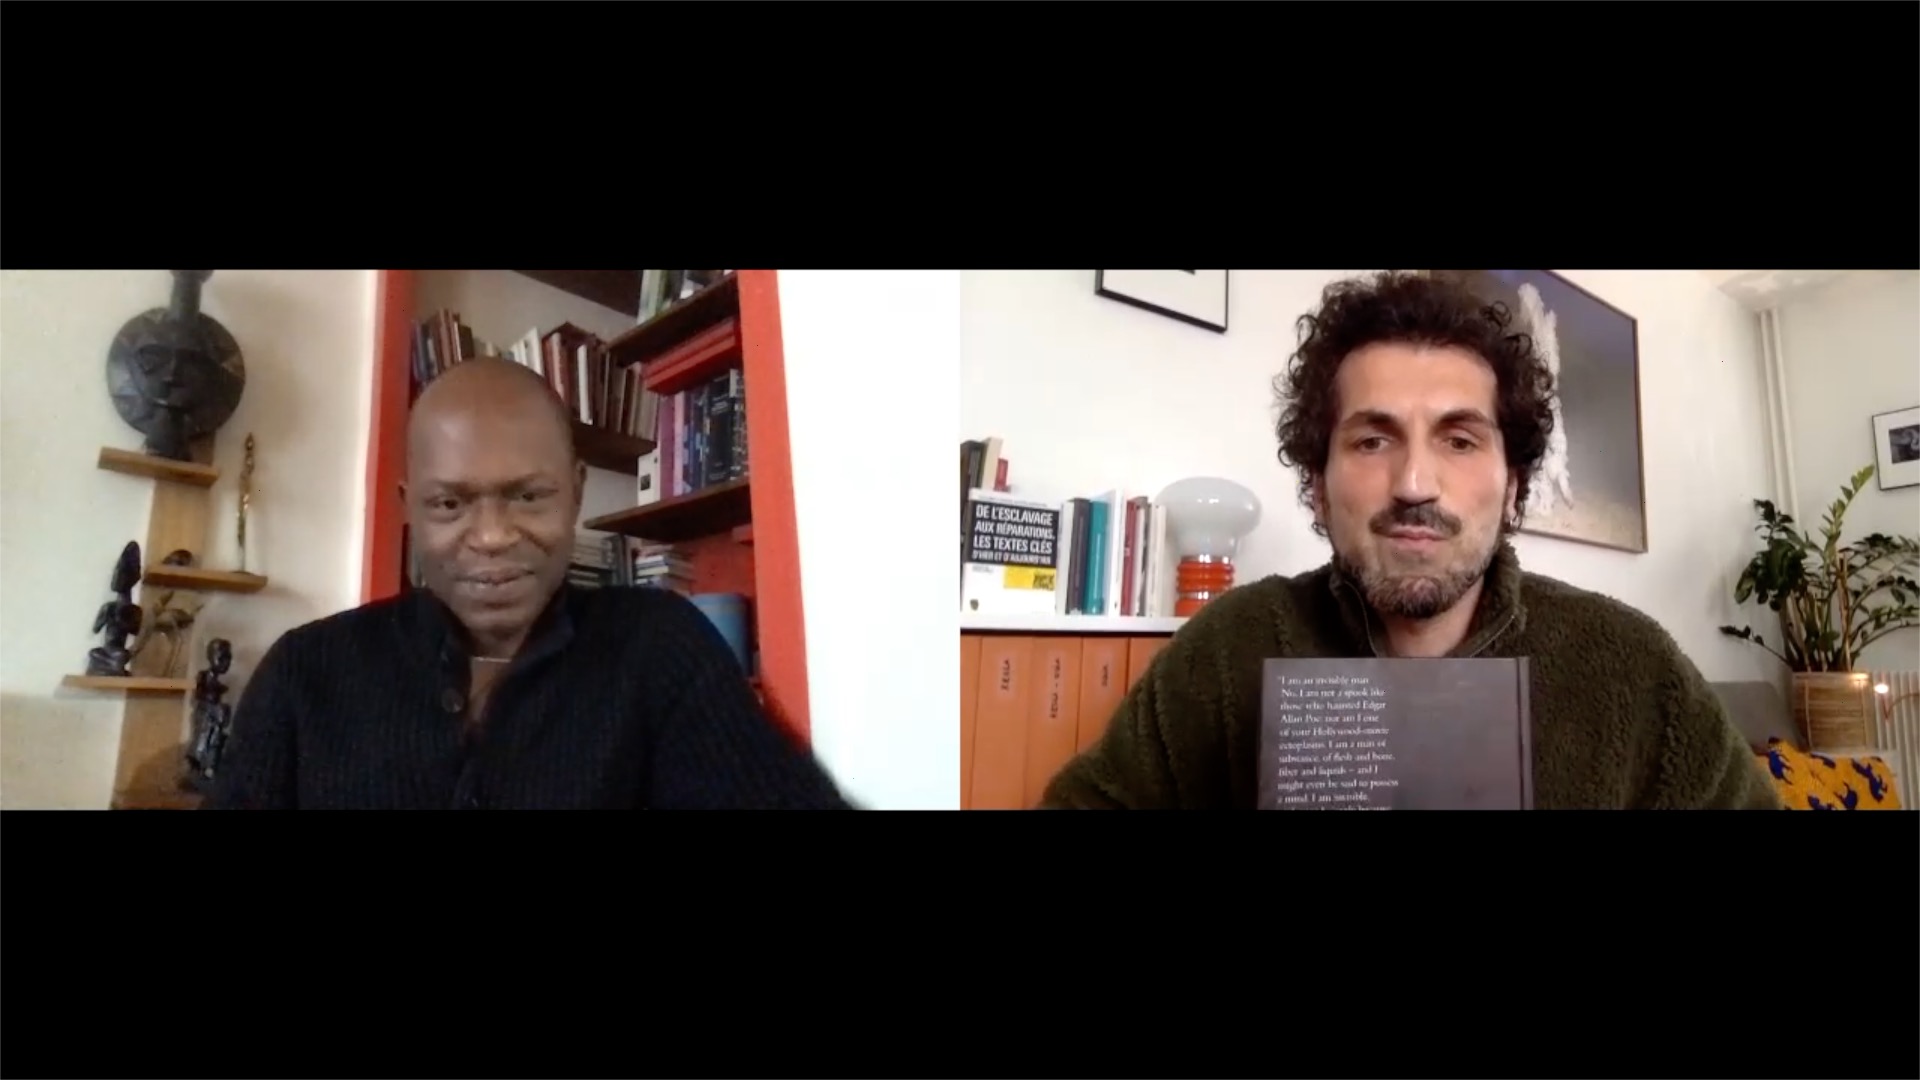 L’ARTIERE TALKS – “BINIDITTU” / NICOLA LO CALZO IN CONVERSATION WITH YVES CHATAP YVES CHATAP